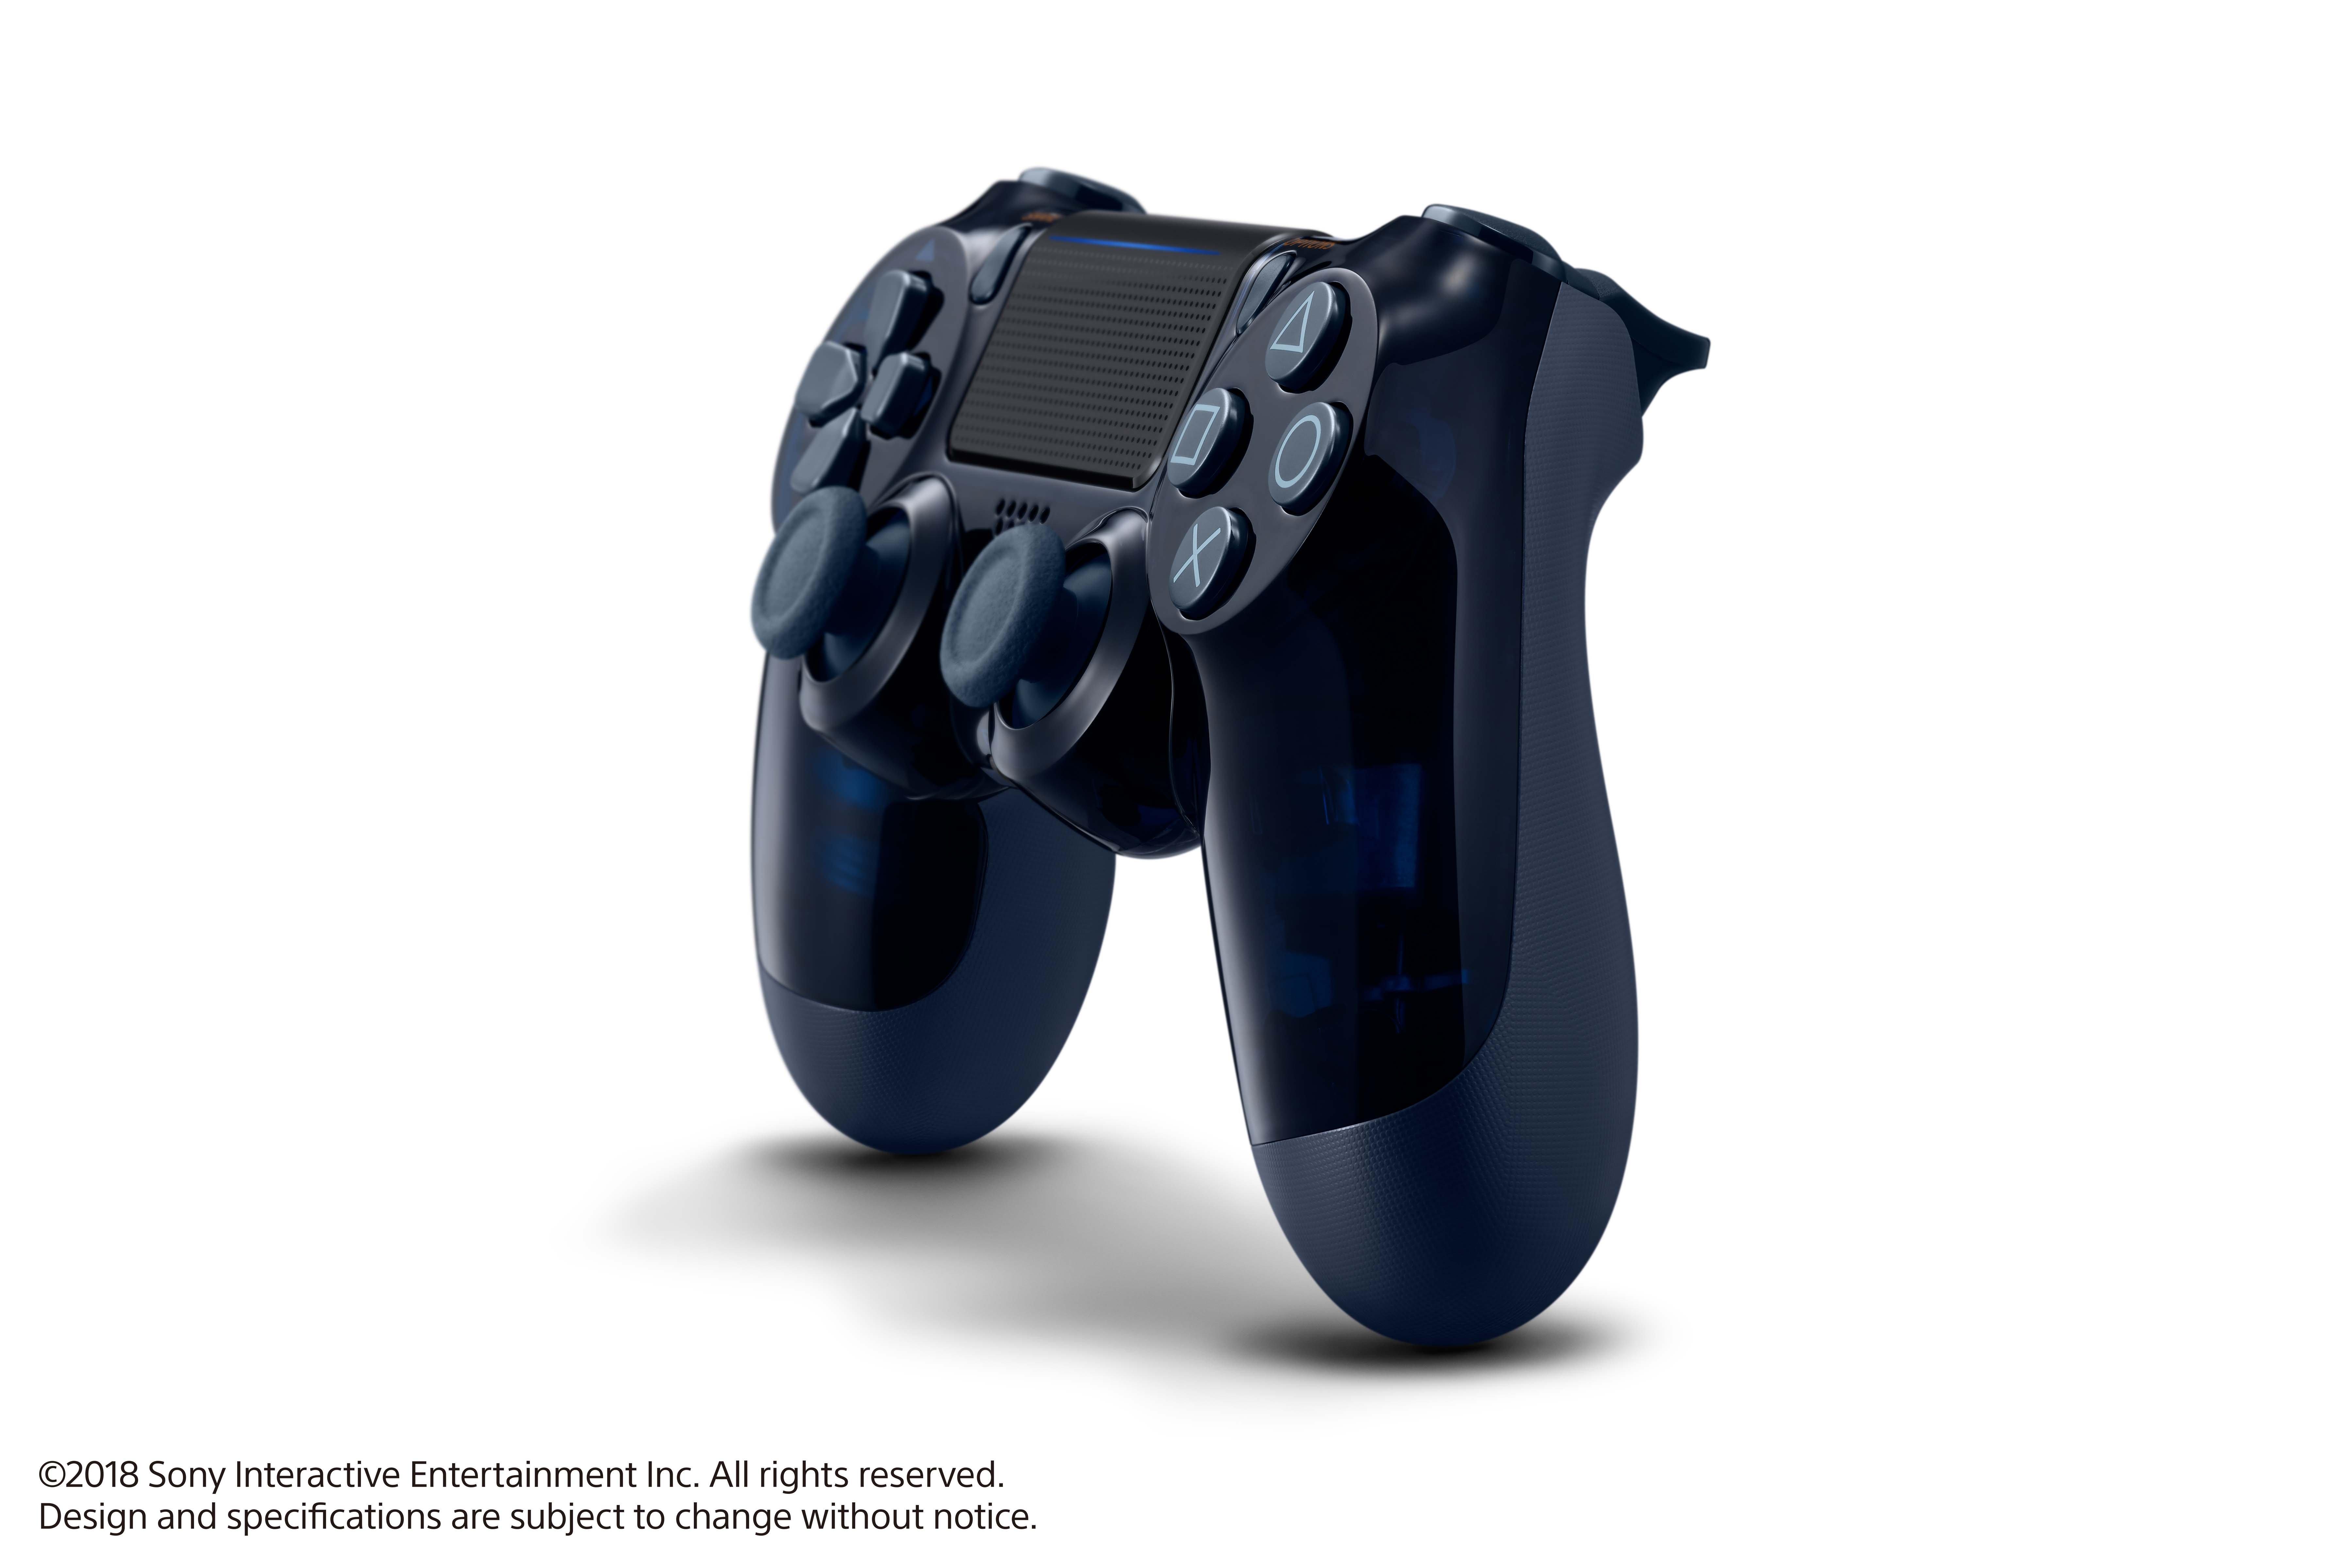 Sony DUALSHOCK 4 Wireless Controller - 500 Million Limited Edition